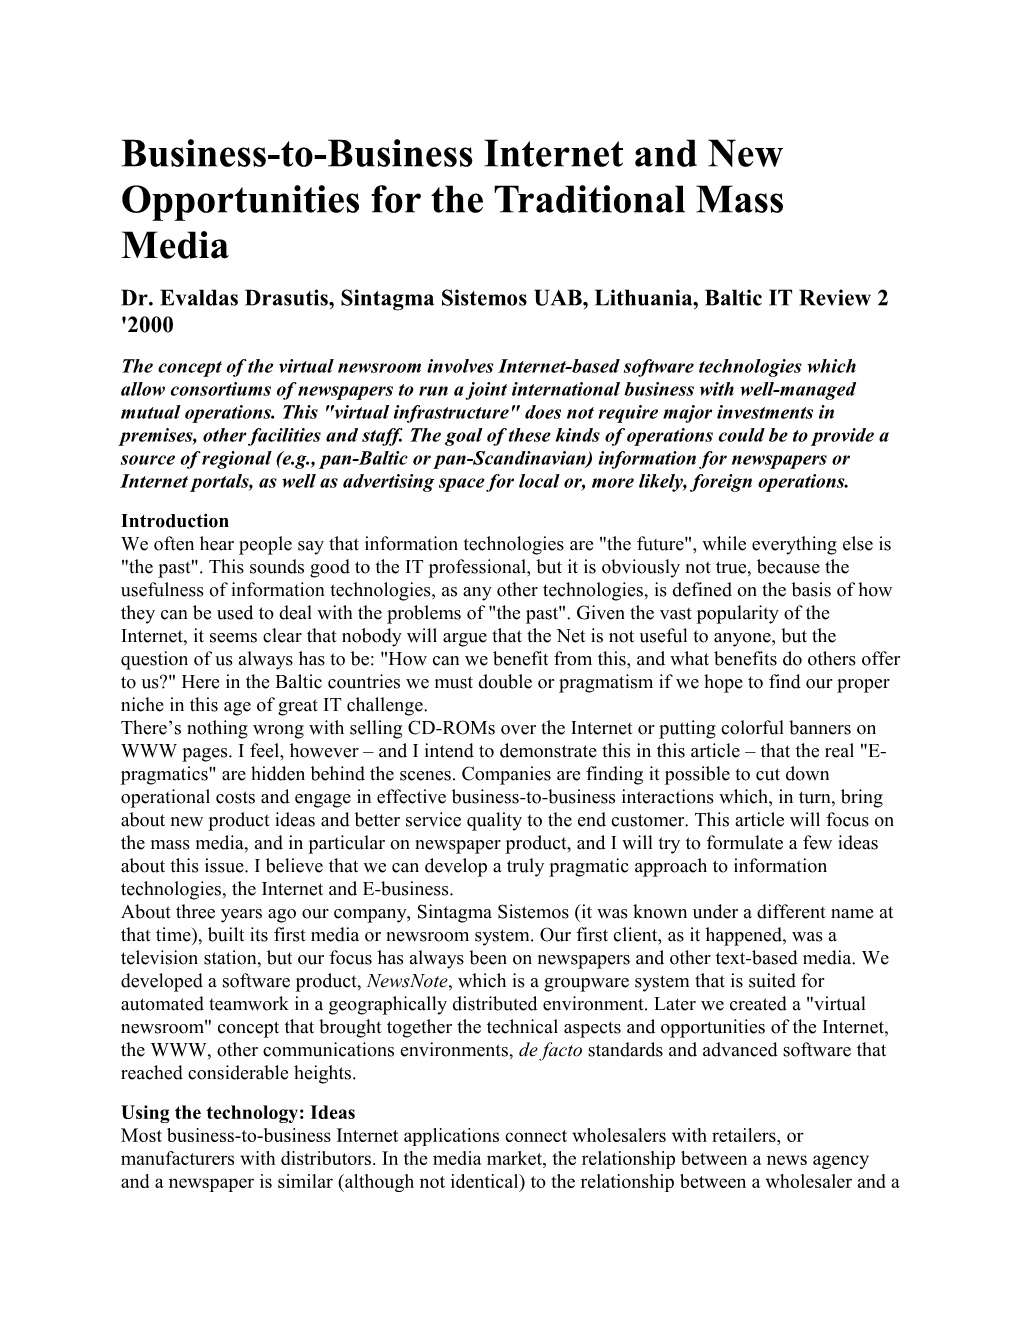 Business-To-Business Internet and New Opportunities for the Traditional Mass Media